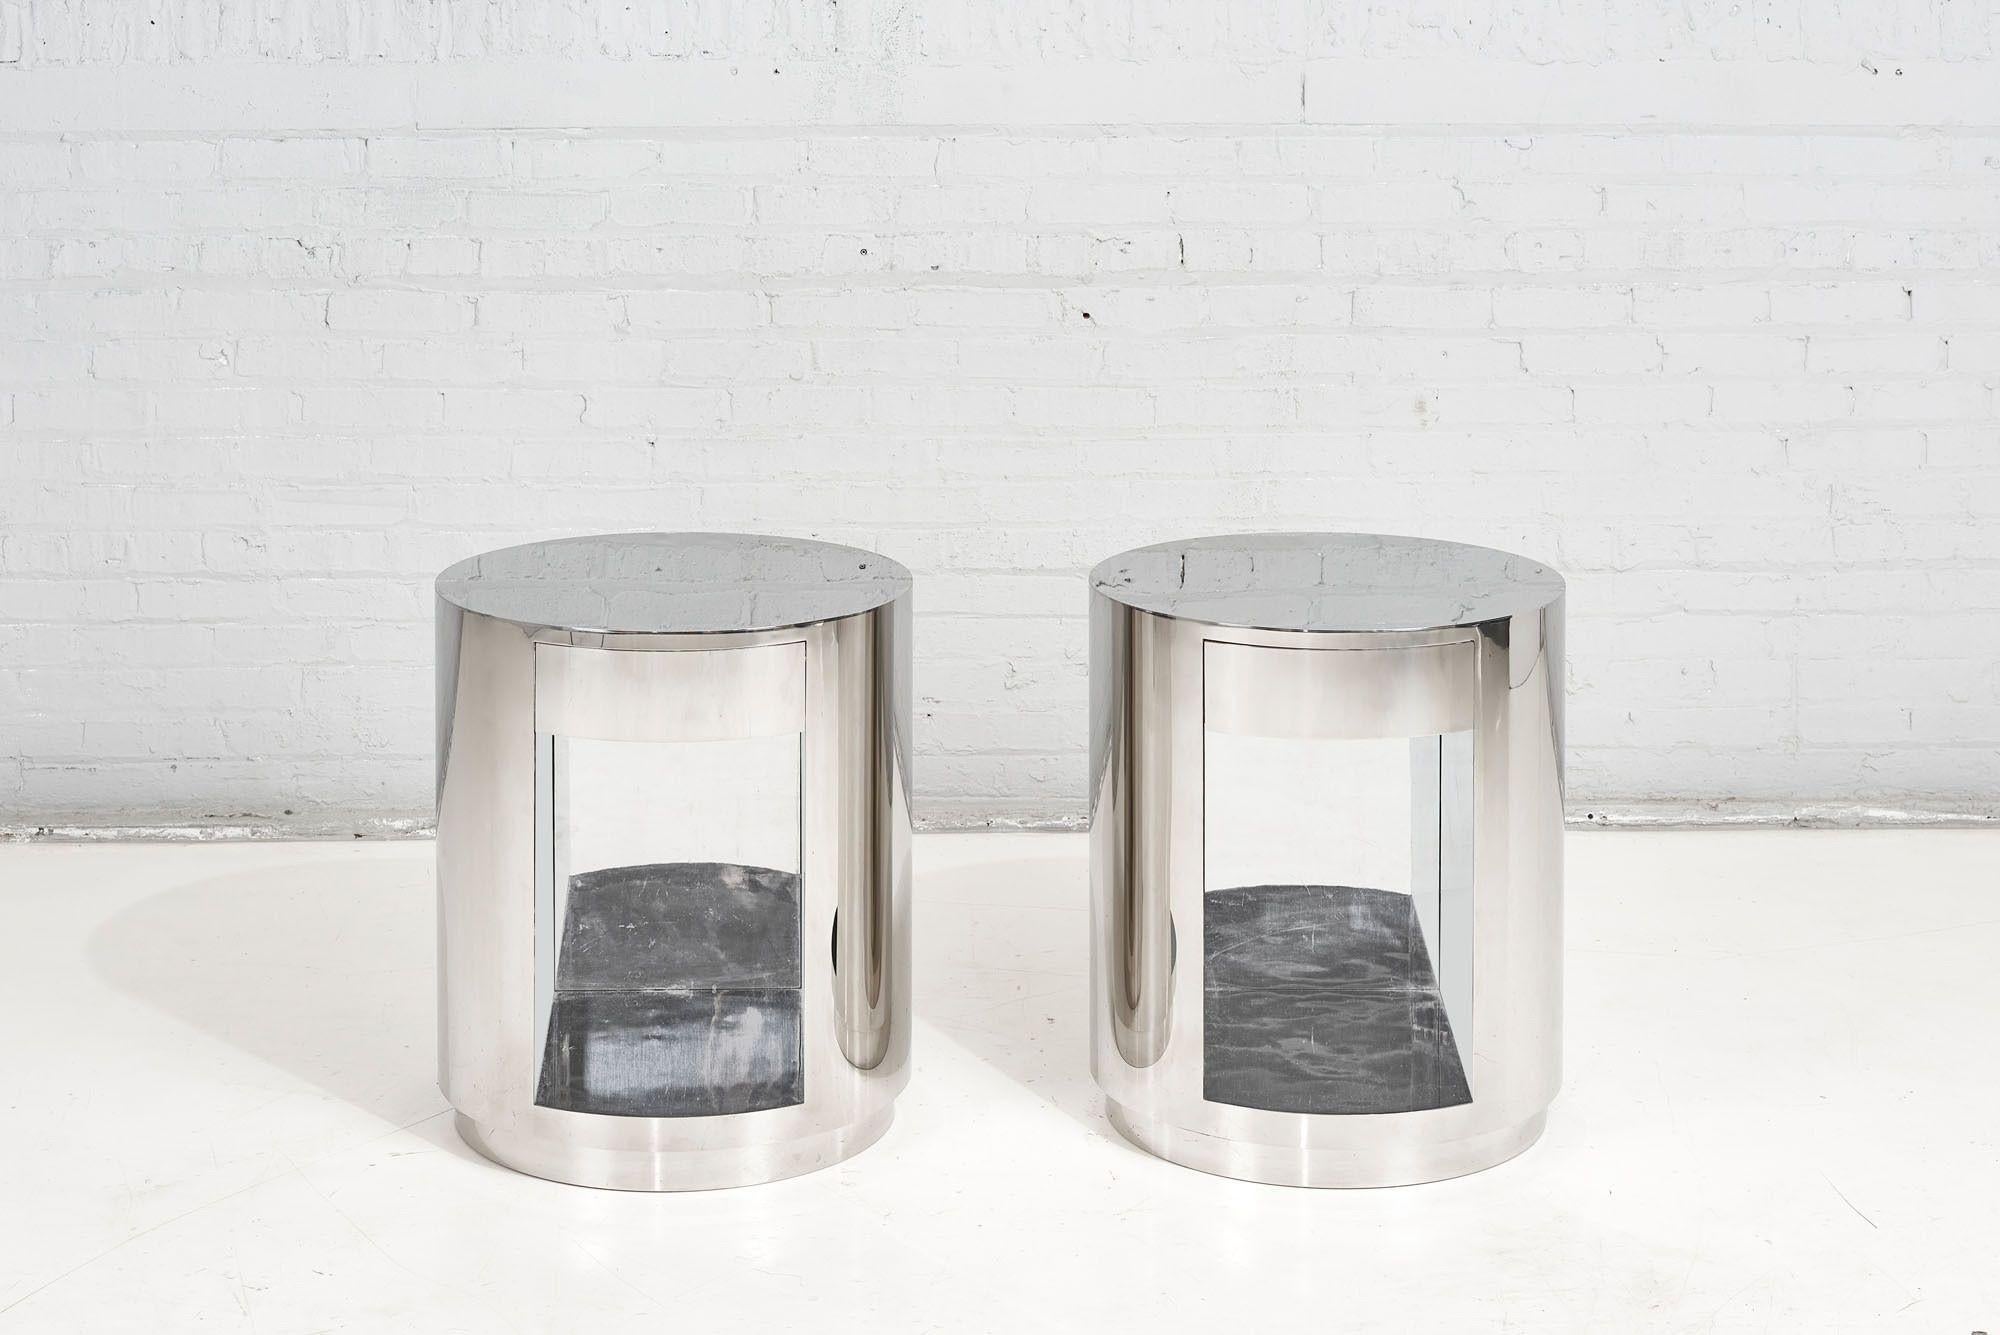 Pace Collection by Leon Rosen stainless steel drum side/end tables with drawer, 1970. Original.